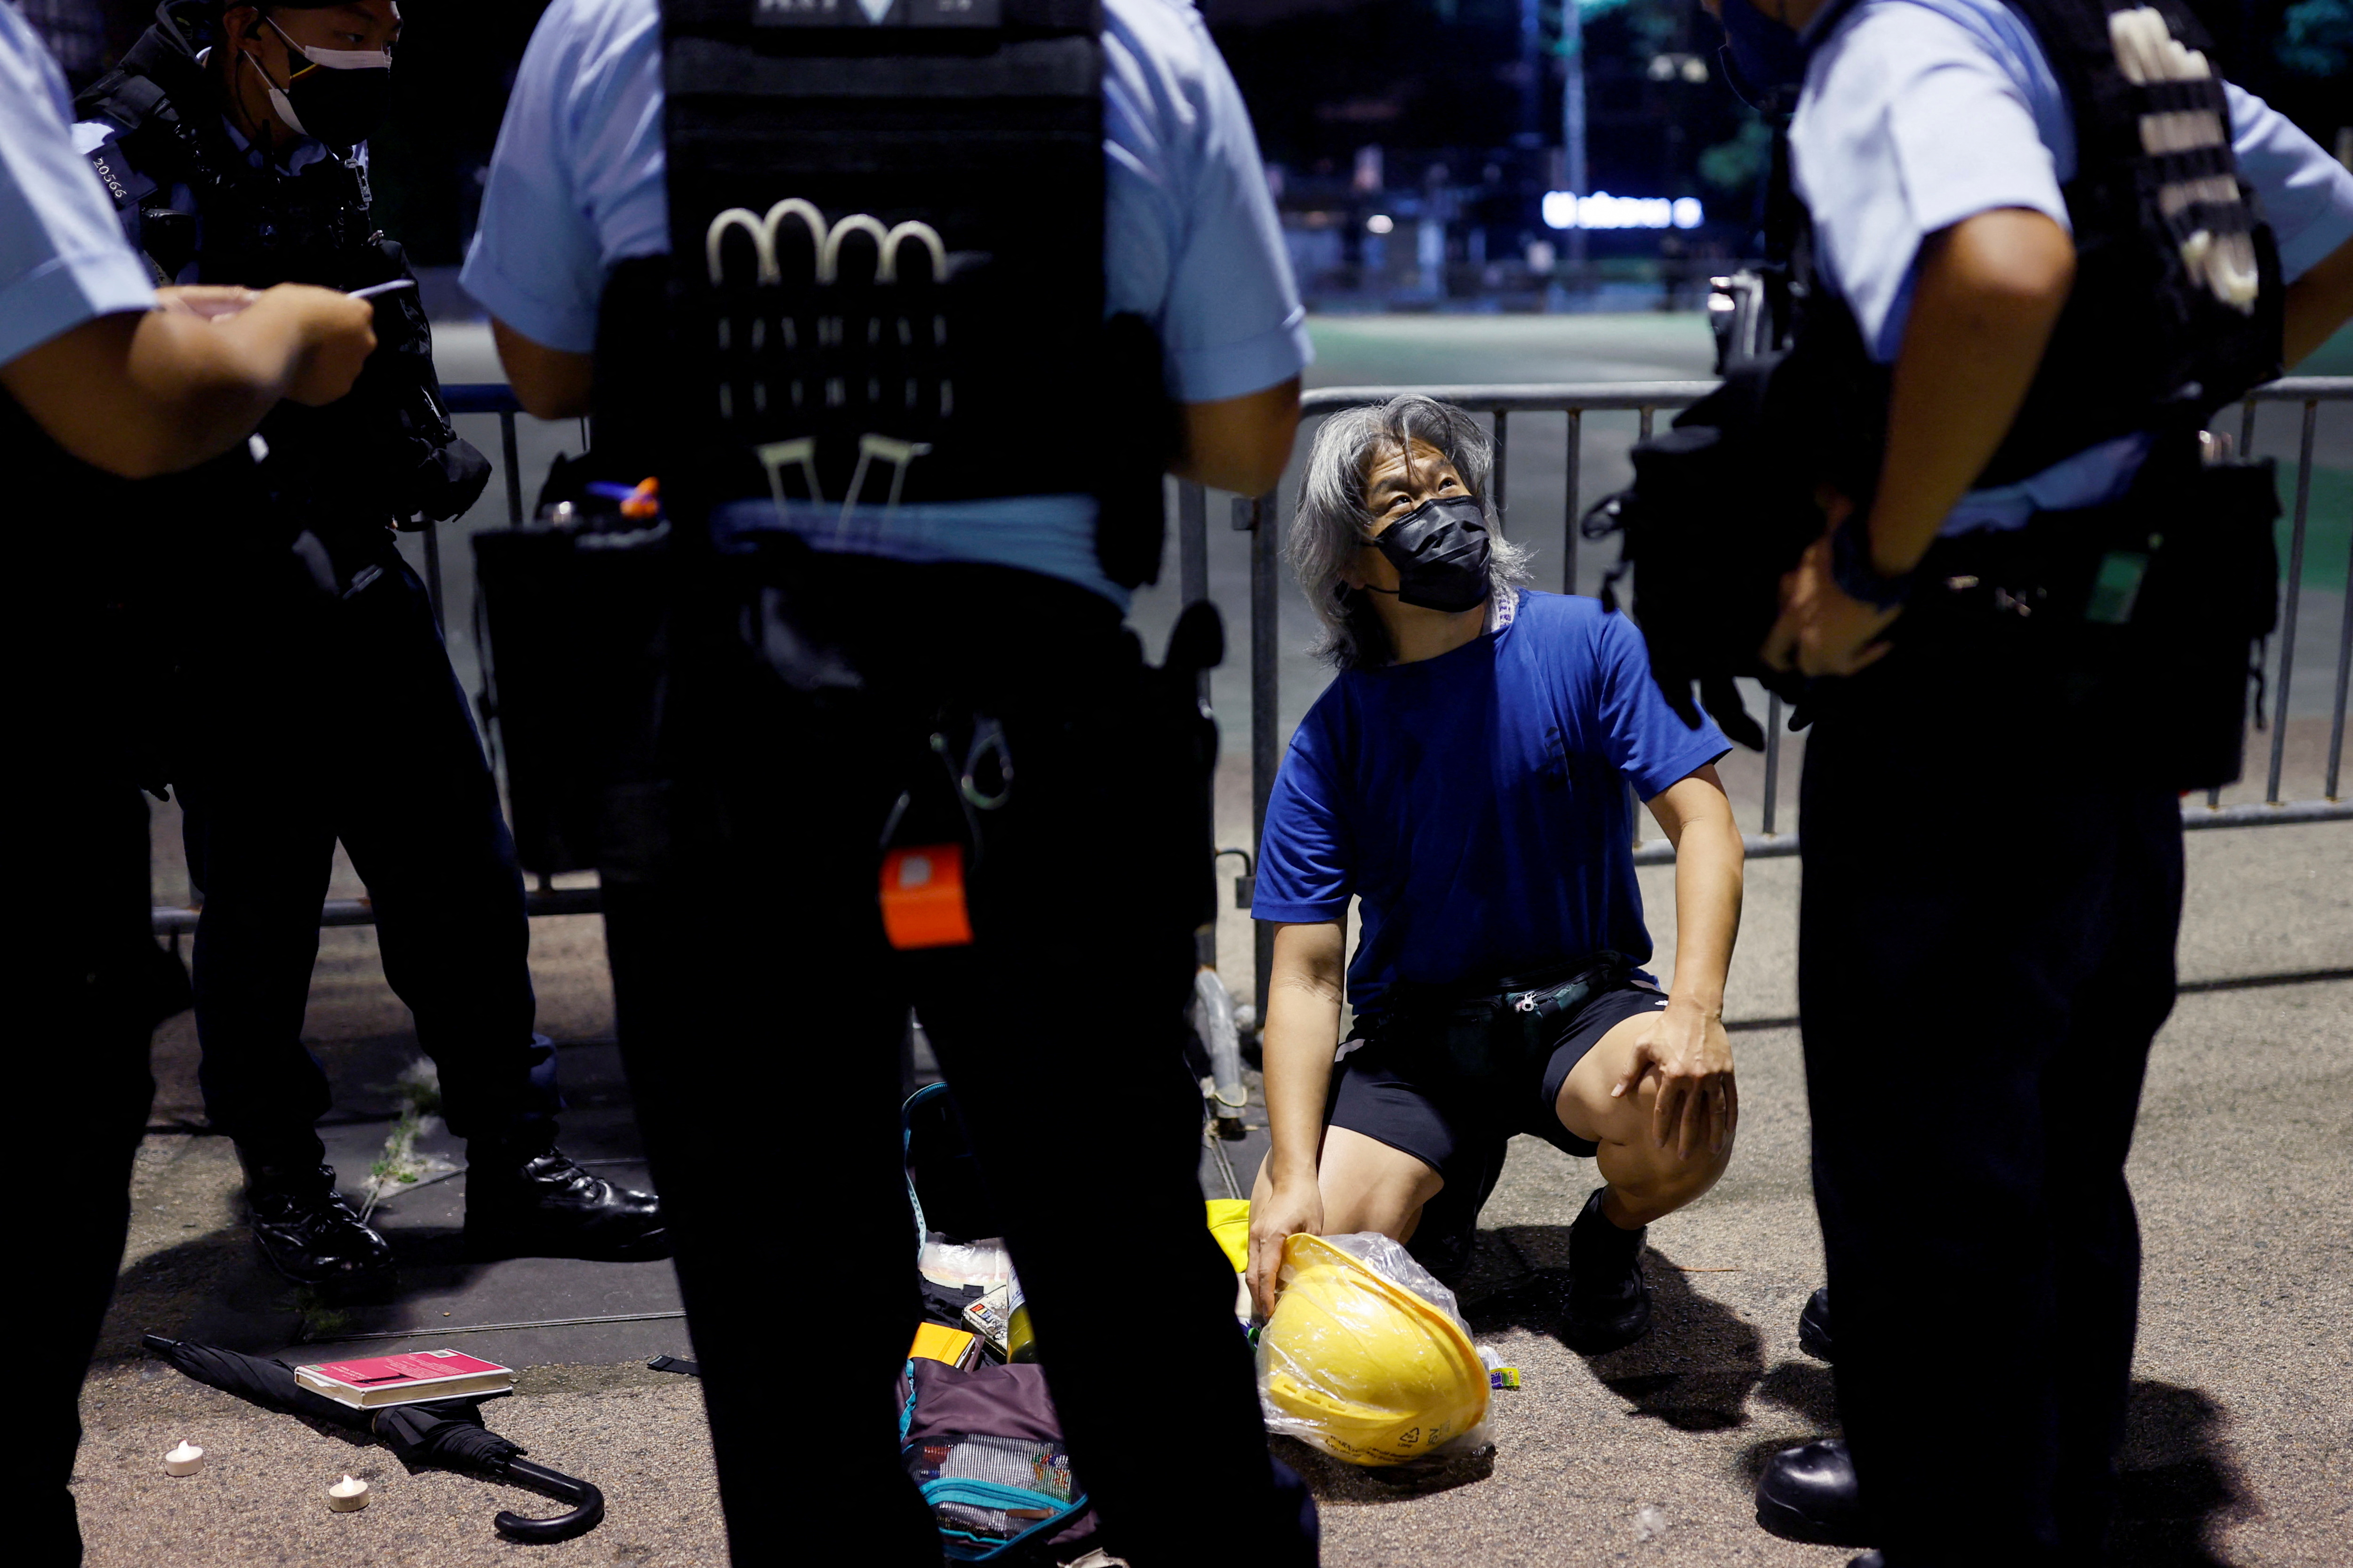 Police officers search a man at Victoria Park, ahead of Tiananmen anniversary, in Hong Kong